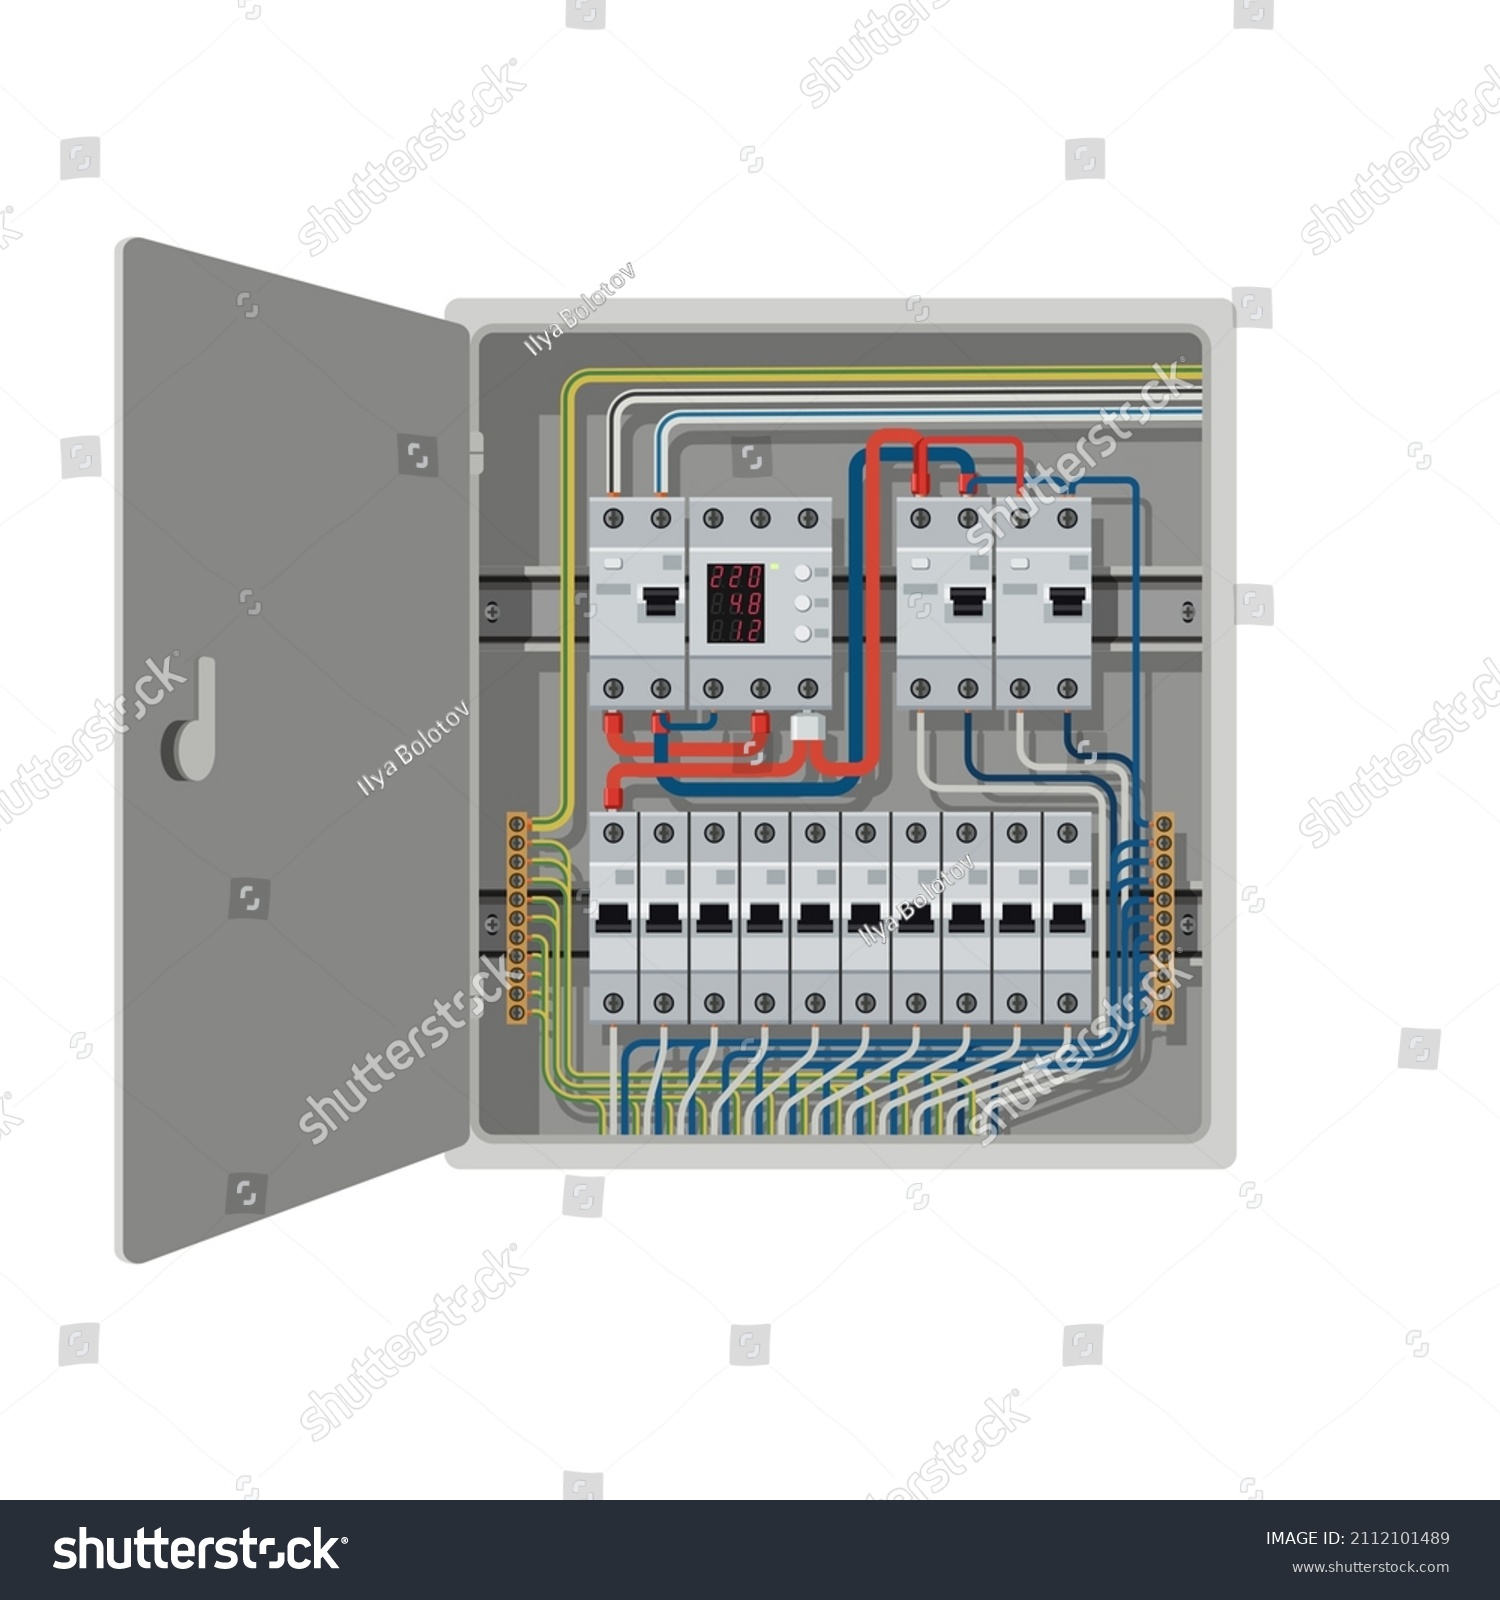 SVG of Electrical circuit breakers are installed in the electrical control panel. Wires are connected to residual current circuit breakers and voltage monitoring relay. svg